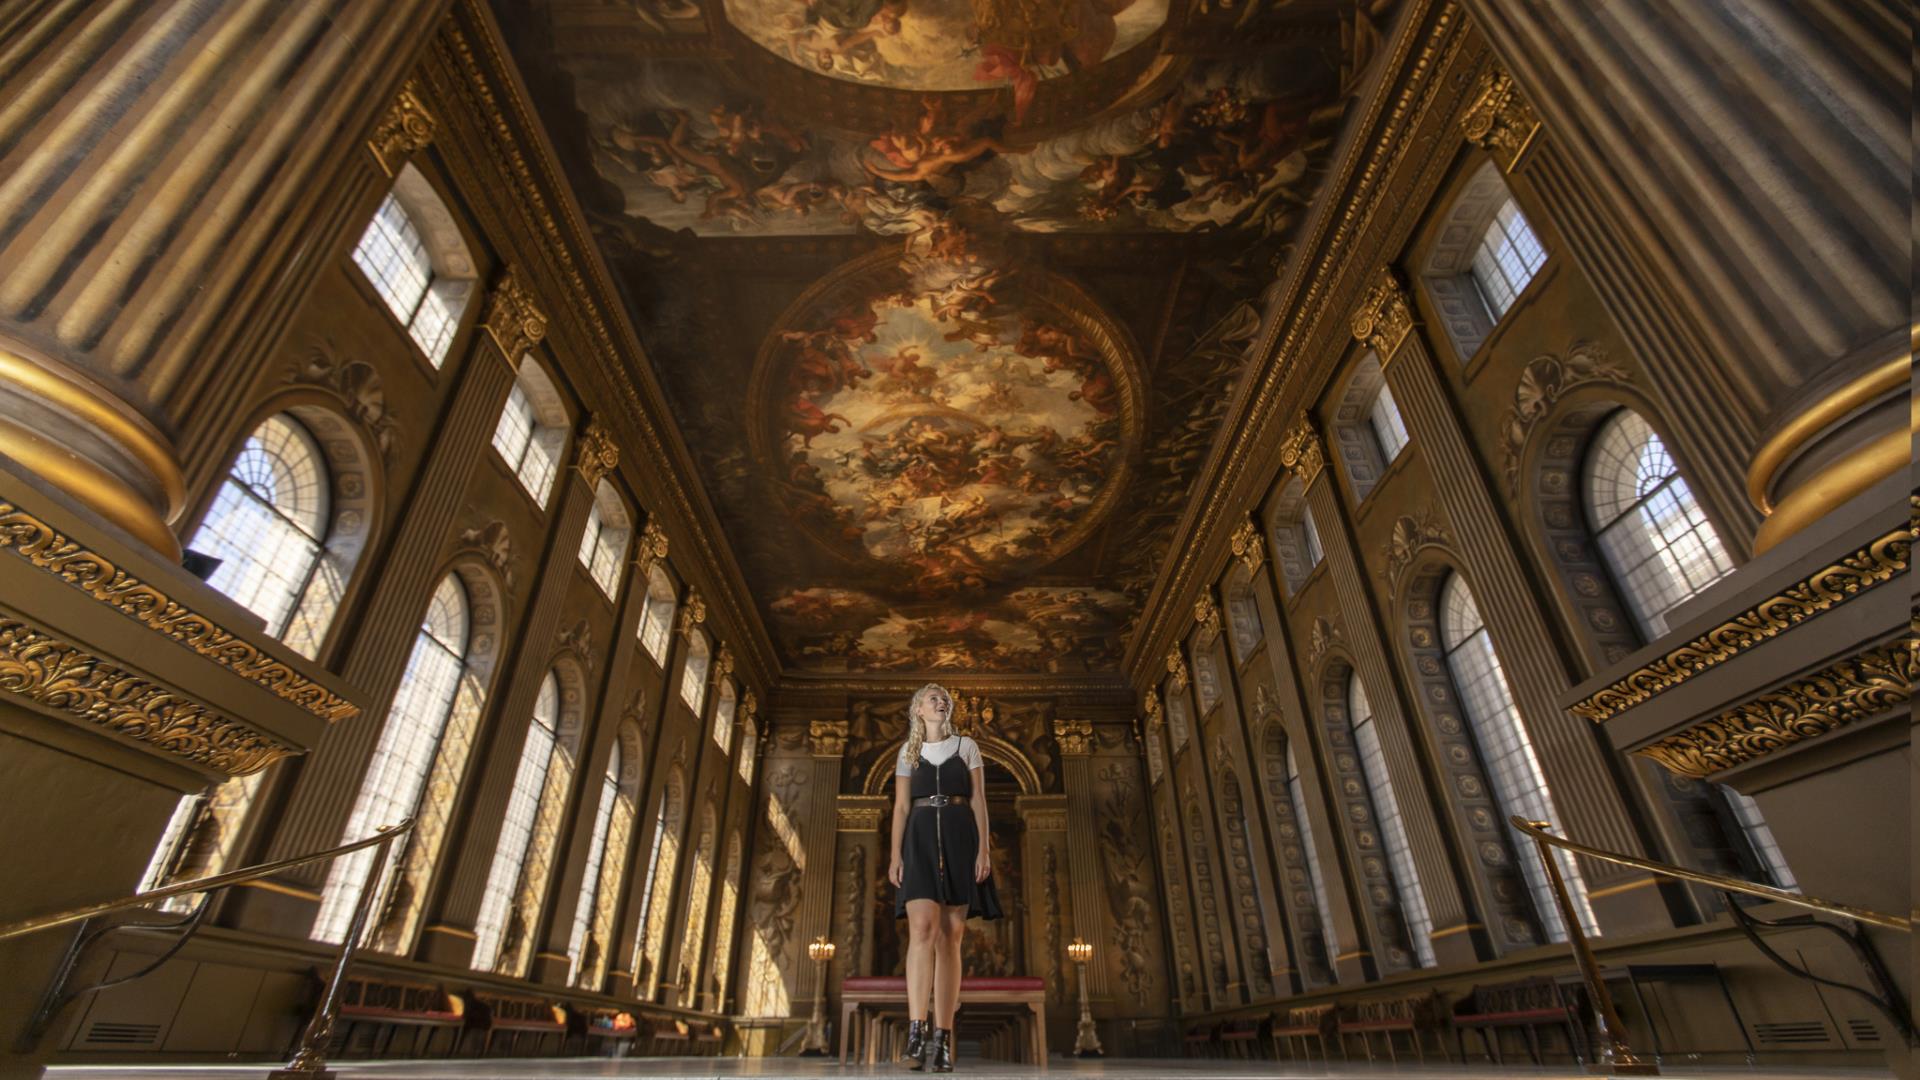 A woman stands in the middle of the huge Painted Hall at the Old Royal Naval College in Greenwich.